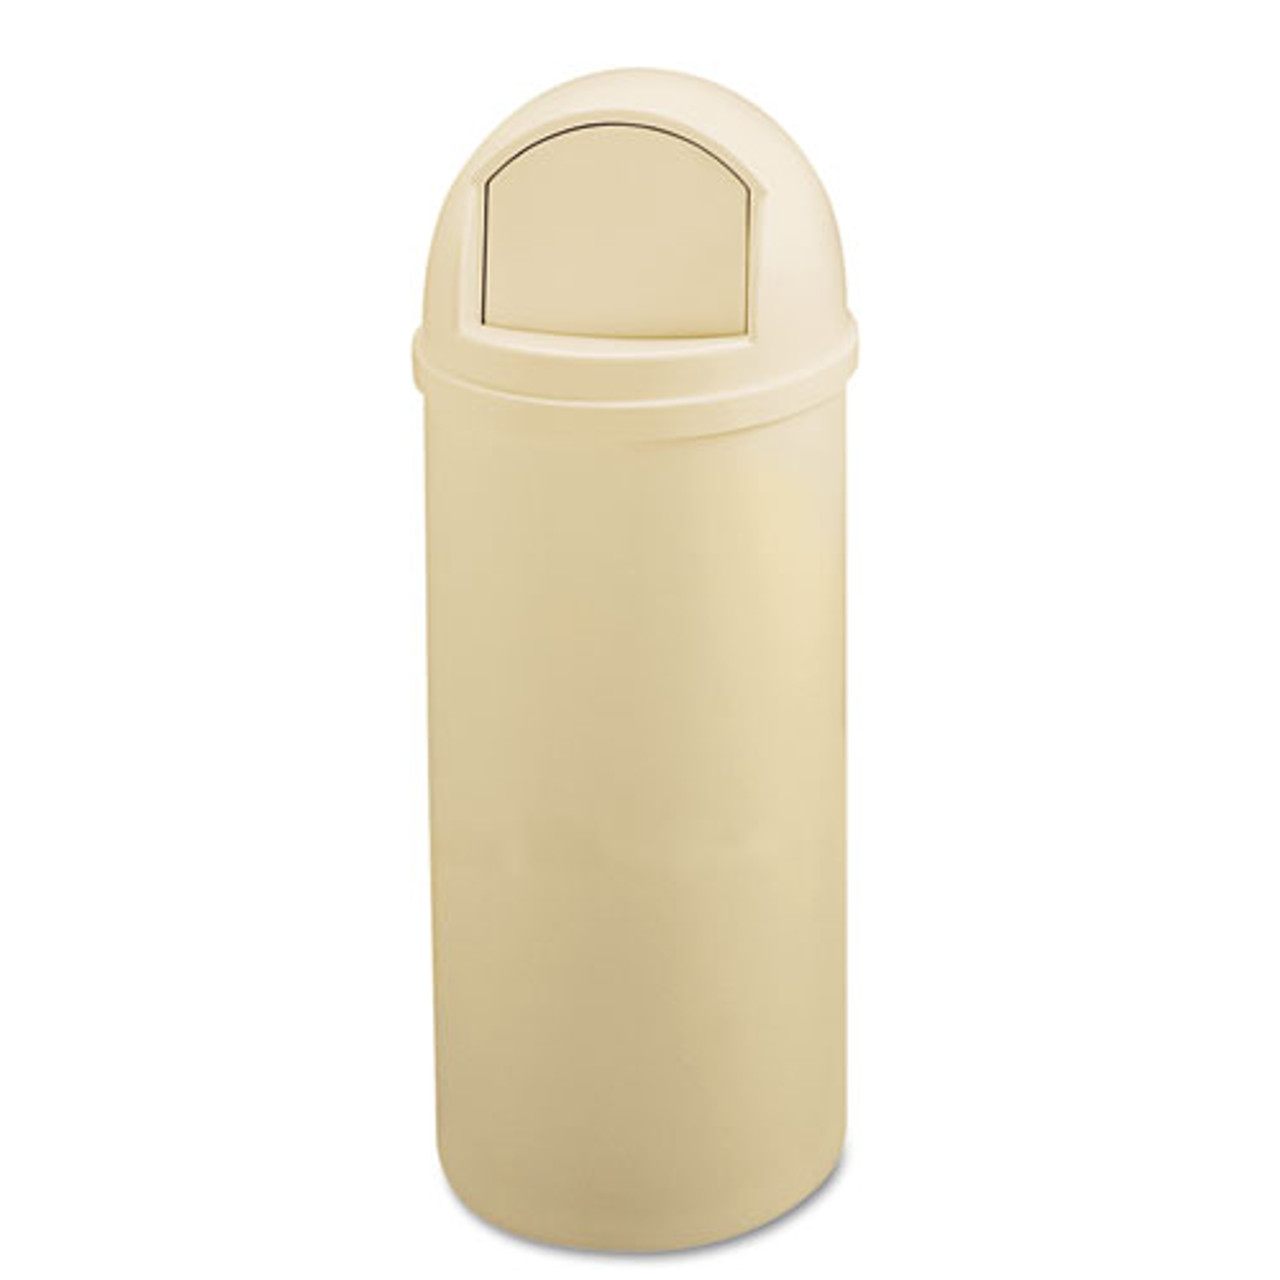 Commercial trash can Rubbermaid Marshall plastic, beige